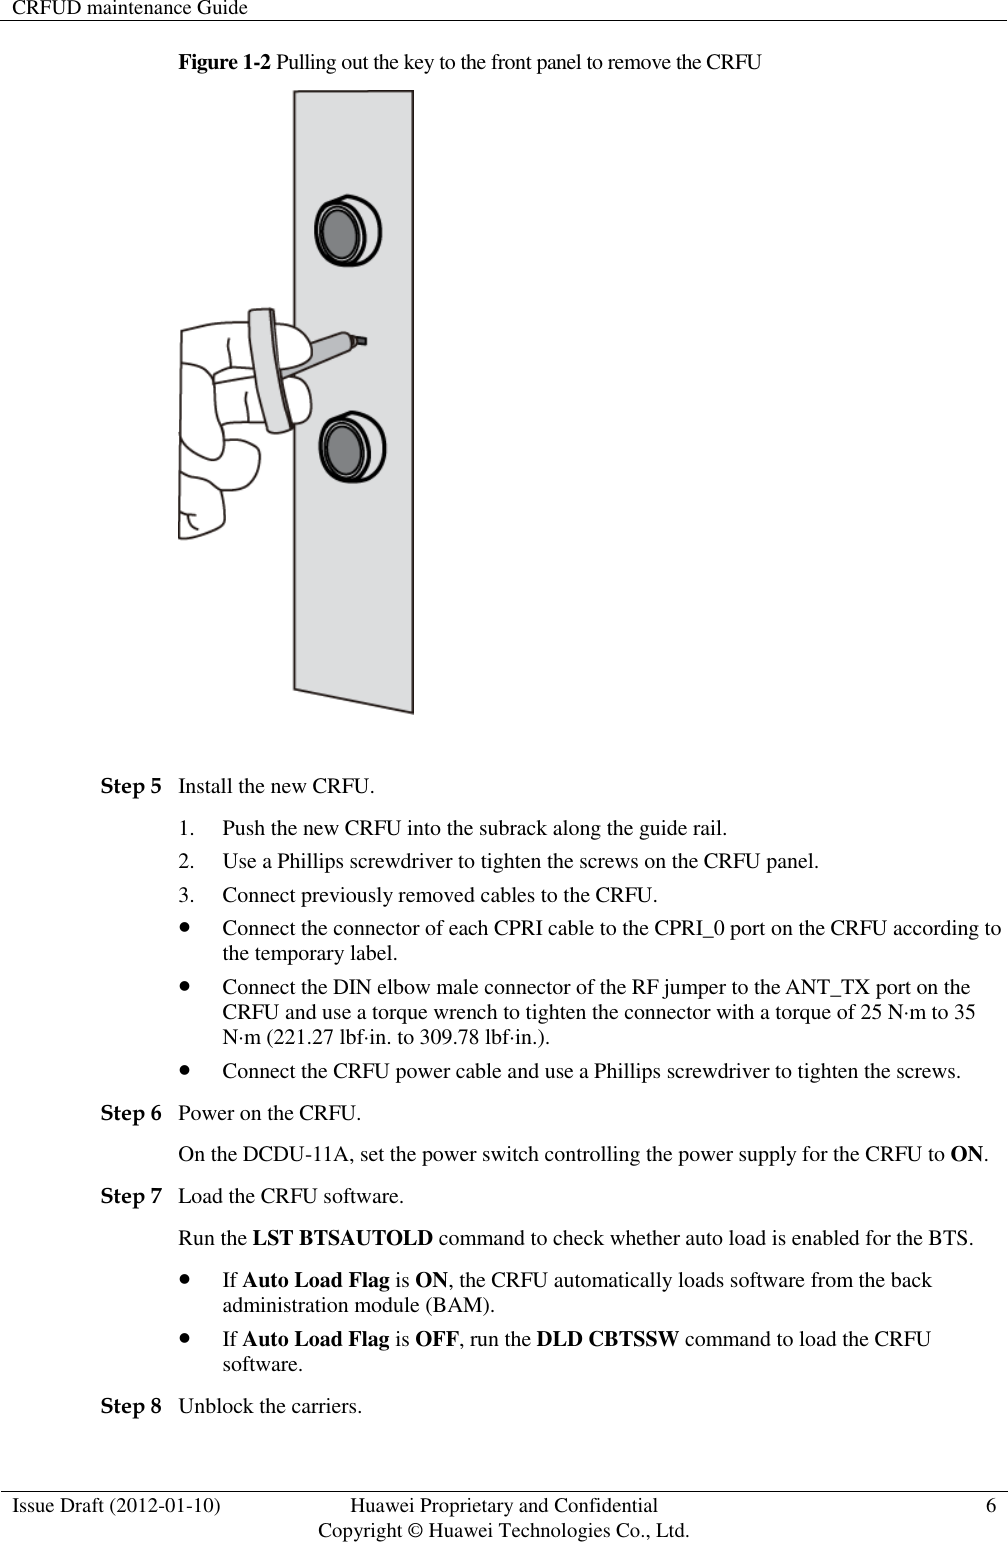 CRFUD maintenance Guide   Issue Draft (2012-01-10) Huawei Proprietary and Confidential                                     Copyright © Huawei Technologies Co., Ltd. 6  Figure 1-2 Pulling out the key to the front panel to remove the CRFU   Step 5 Install the new CRFU. 1. Push the new CRFU into the subrack along the guide rail. 2. Use a Phillips screwdriver to tighten the screws on the CRFU panel. 3. Connect previously removed cables to the CRFU.  Connect the connector of each CPRI cable to the CPRI_0 port on the CRFU according to the temporary label.  Connect the DIN elbow male connector of the RF jumper to the ANT_TX port on the CRFU and use a torque wrench to tighten the connector with a torque of 25 N·m to 35 N·m (221.27 lbf·in. to 309.78 lbf·in.).    Connect the CRFU power cable and use a Phillips screwdriver to tighten the screws. Step 6 Power on the CRFU. On the DCDU-11A, set the power switch controlling the power supply for the CRFU to ON. Step 7 Load the CRFU software. Run the LST BTSAUTOLD command to check whether auto load is enabled for the BTS.  If Auto Load Flag is ON, the CRFU automatically loads software from the back administration module (BAM).    If Auto Load Flag is OFF, run the DLD CBTSSW command to load the CRFU software.   Step 8 Unblock the carriers. 